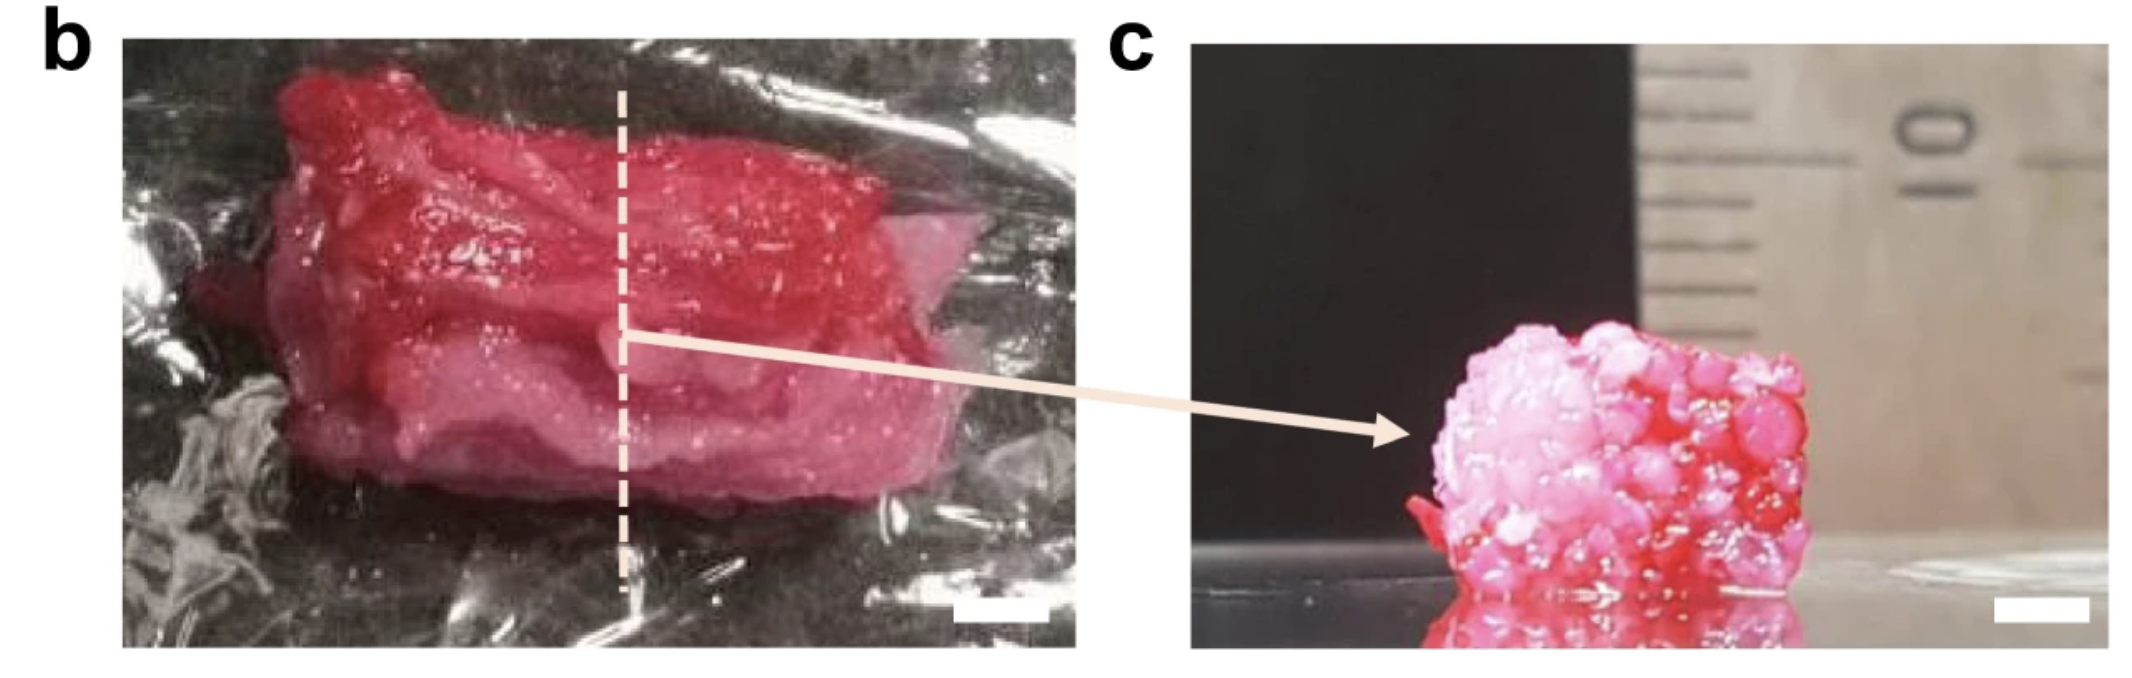 Researchers at Osaka University have created a cultured steak with bioprinting.